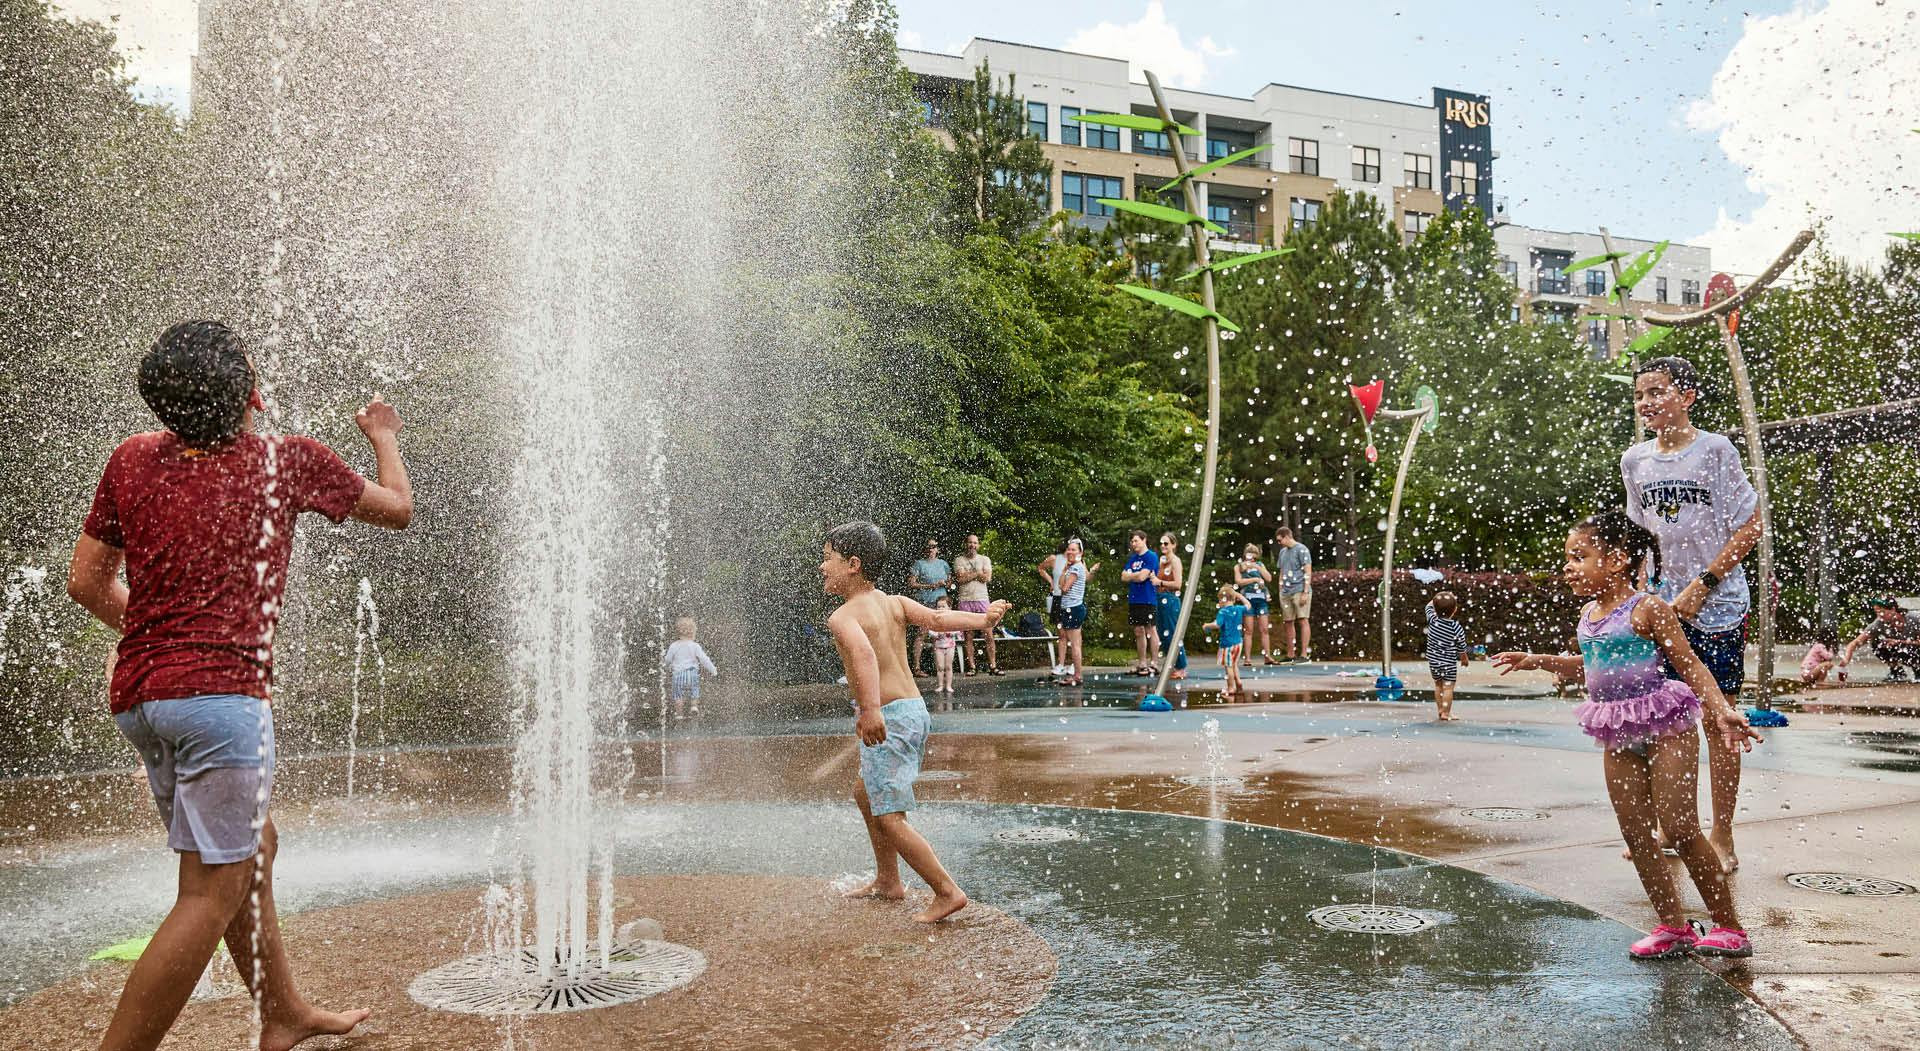 Water rains down on kids playing in the Historic Fourth Ward splash pad. (Photo Credit: Erin Sintos)